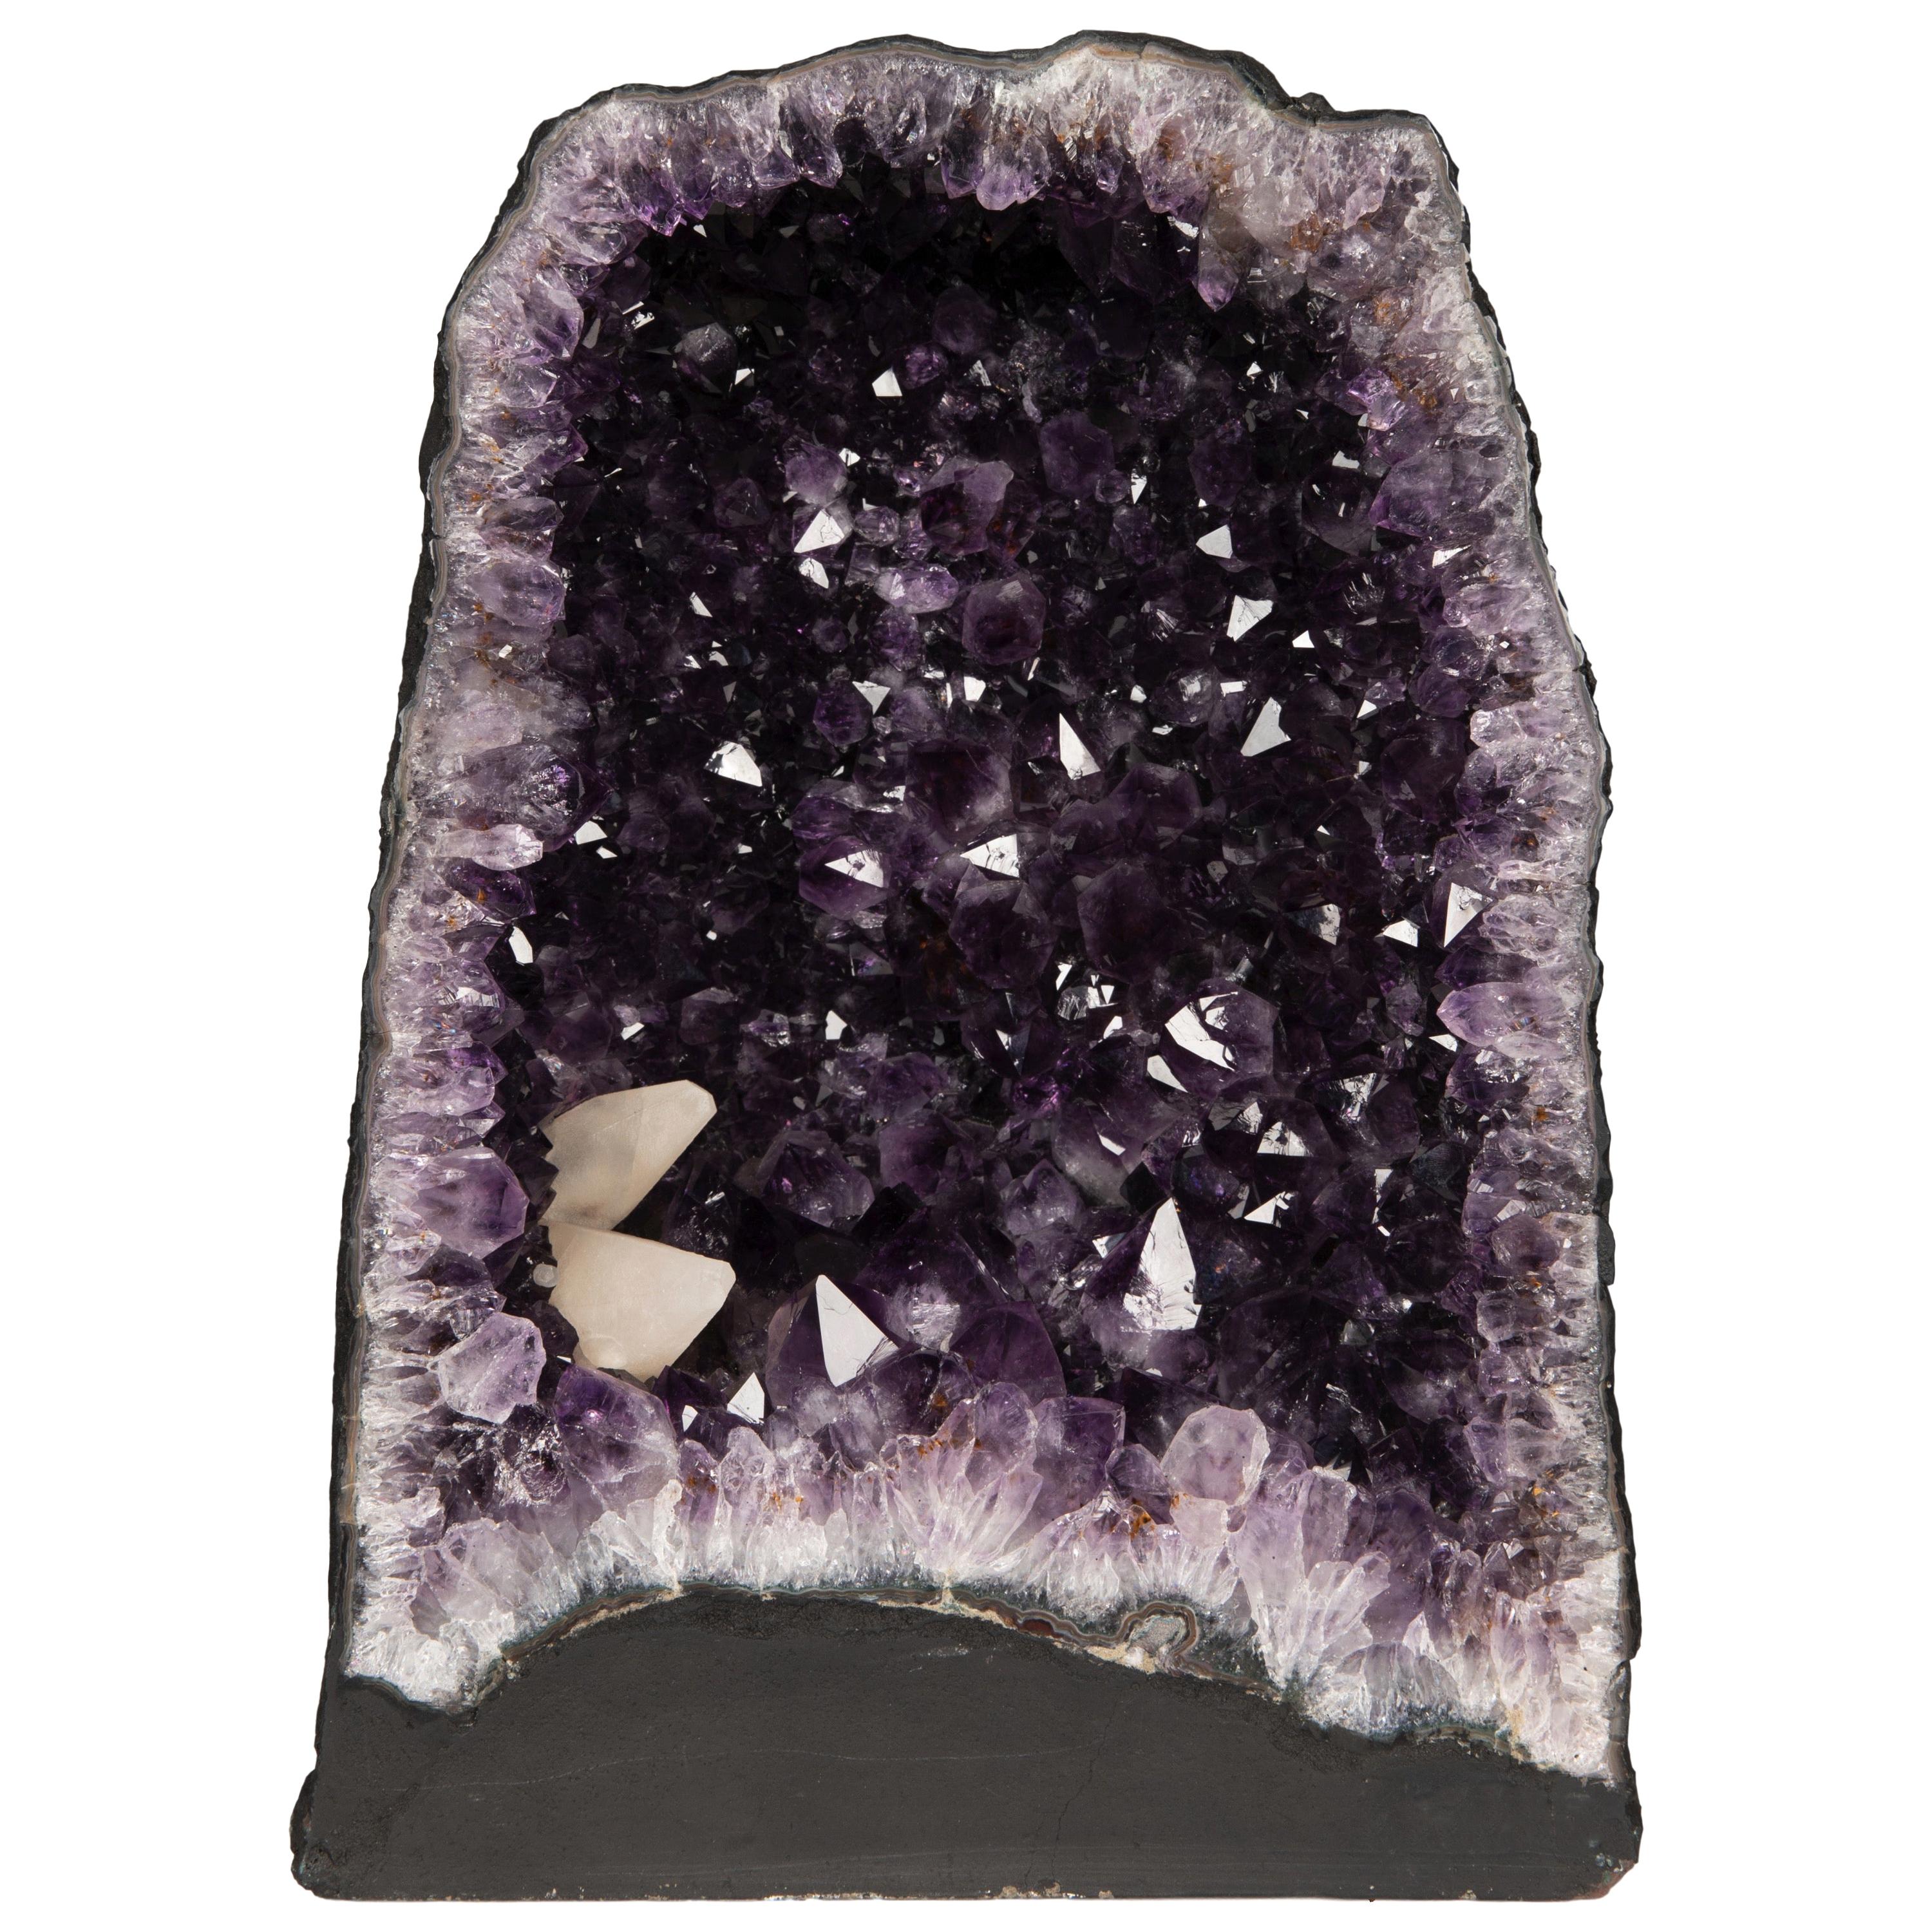 Purple Half Geode Amethyst with Calcite Formations Shaped as Cathedral or Chapel